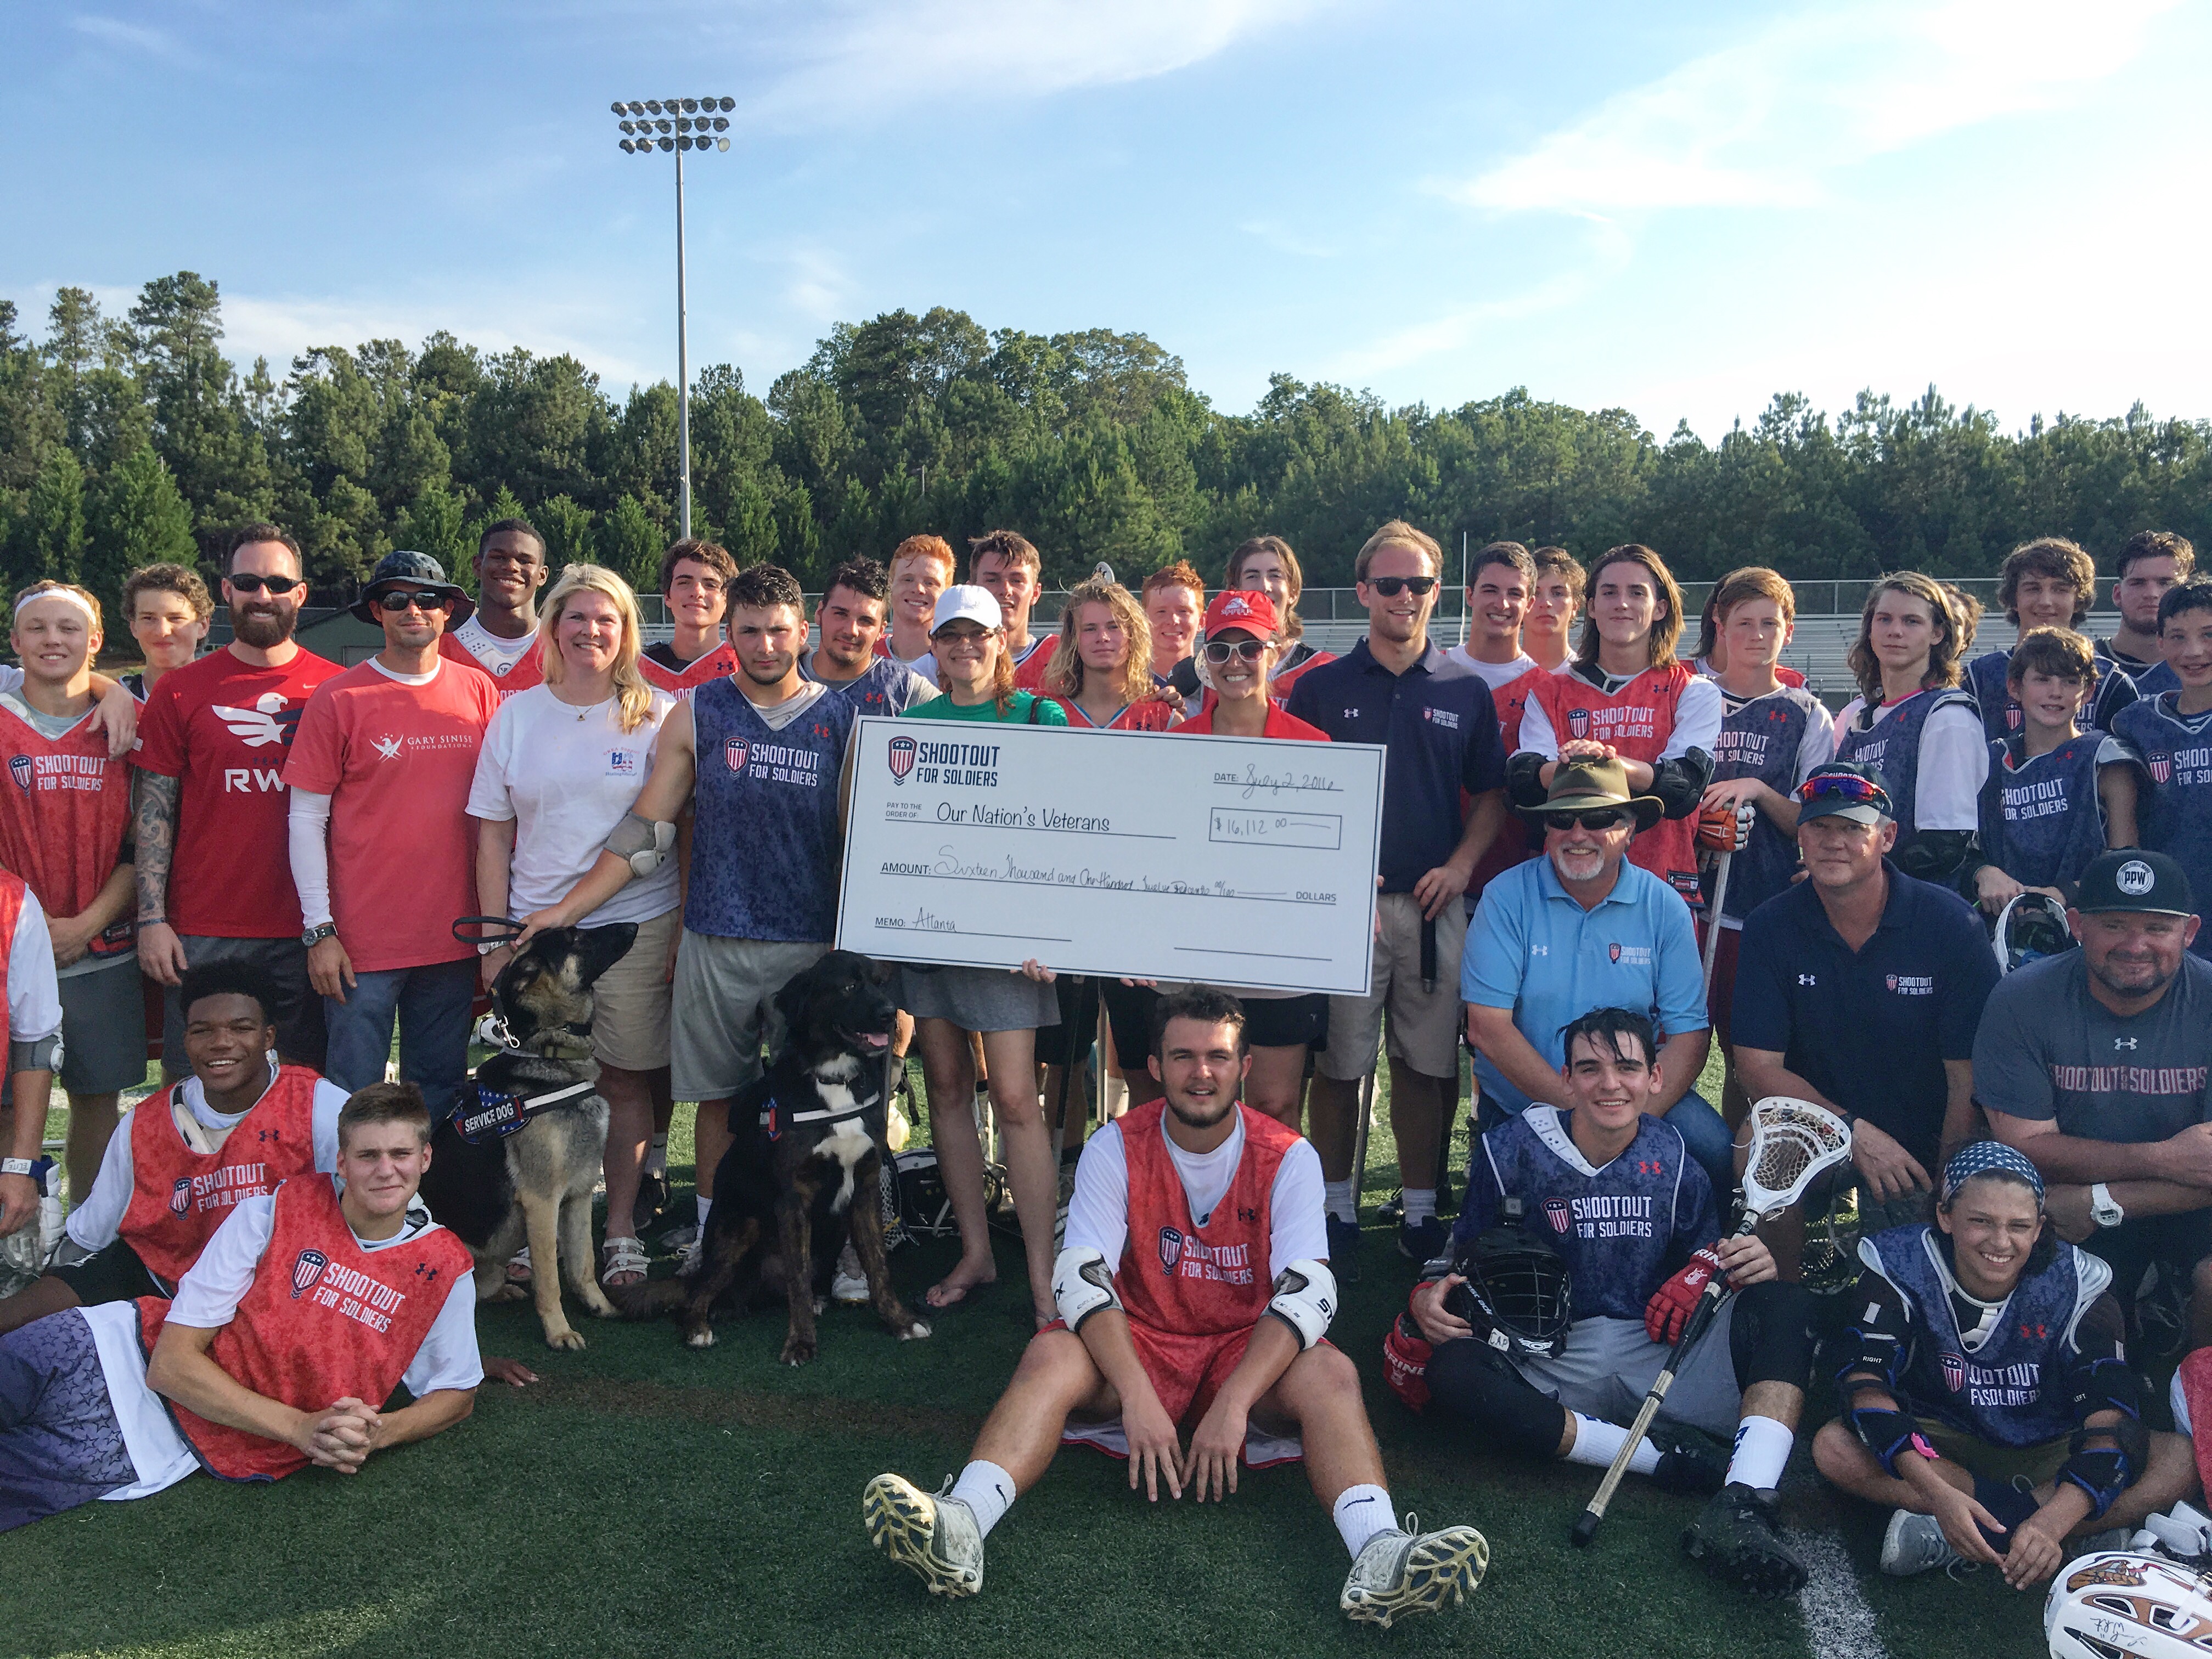 SFS Atlanta fundraises $16,112 in The South’s first ever Shootout for Soldiers!